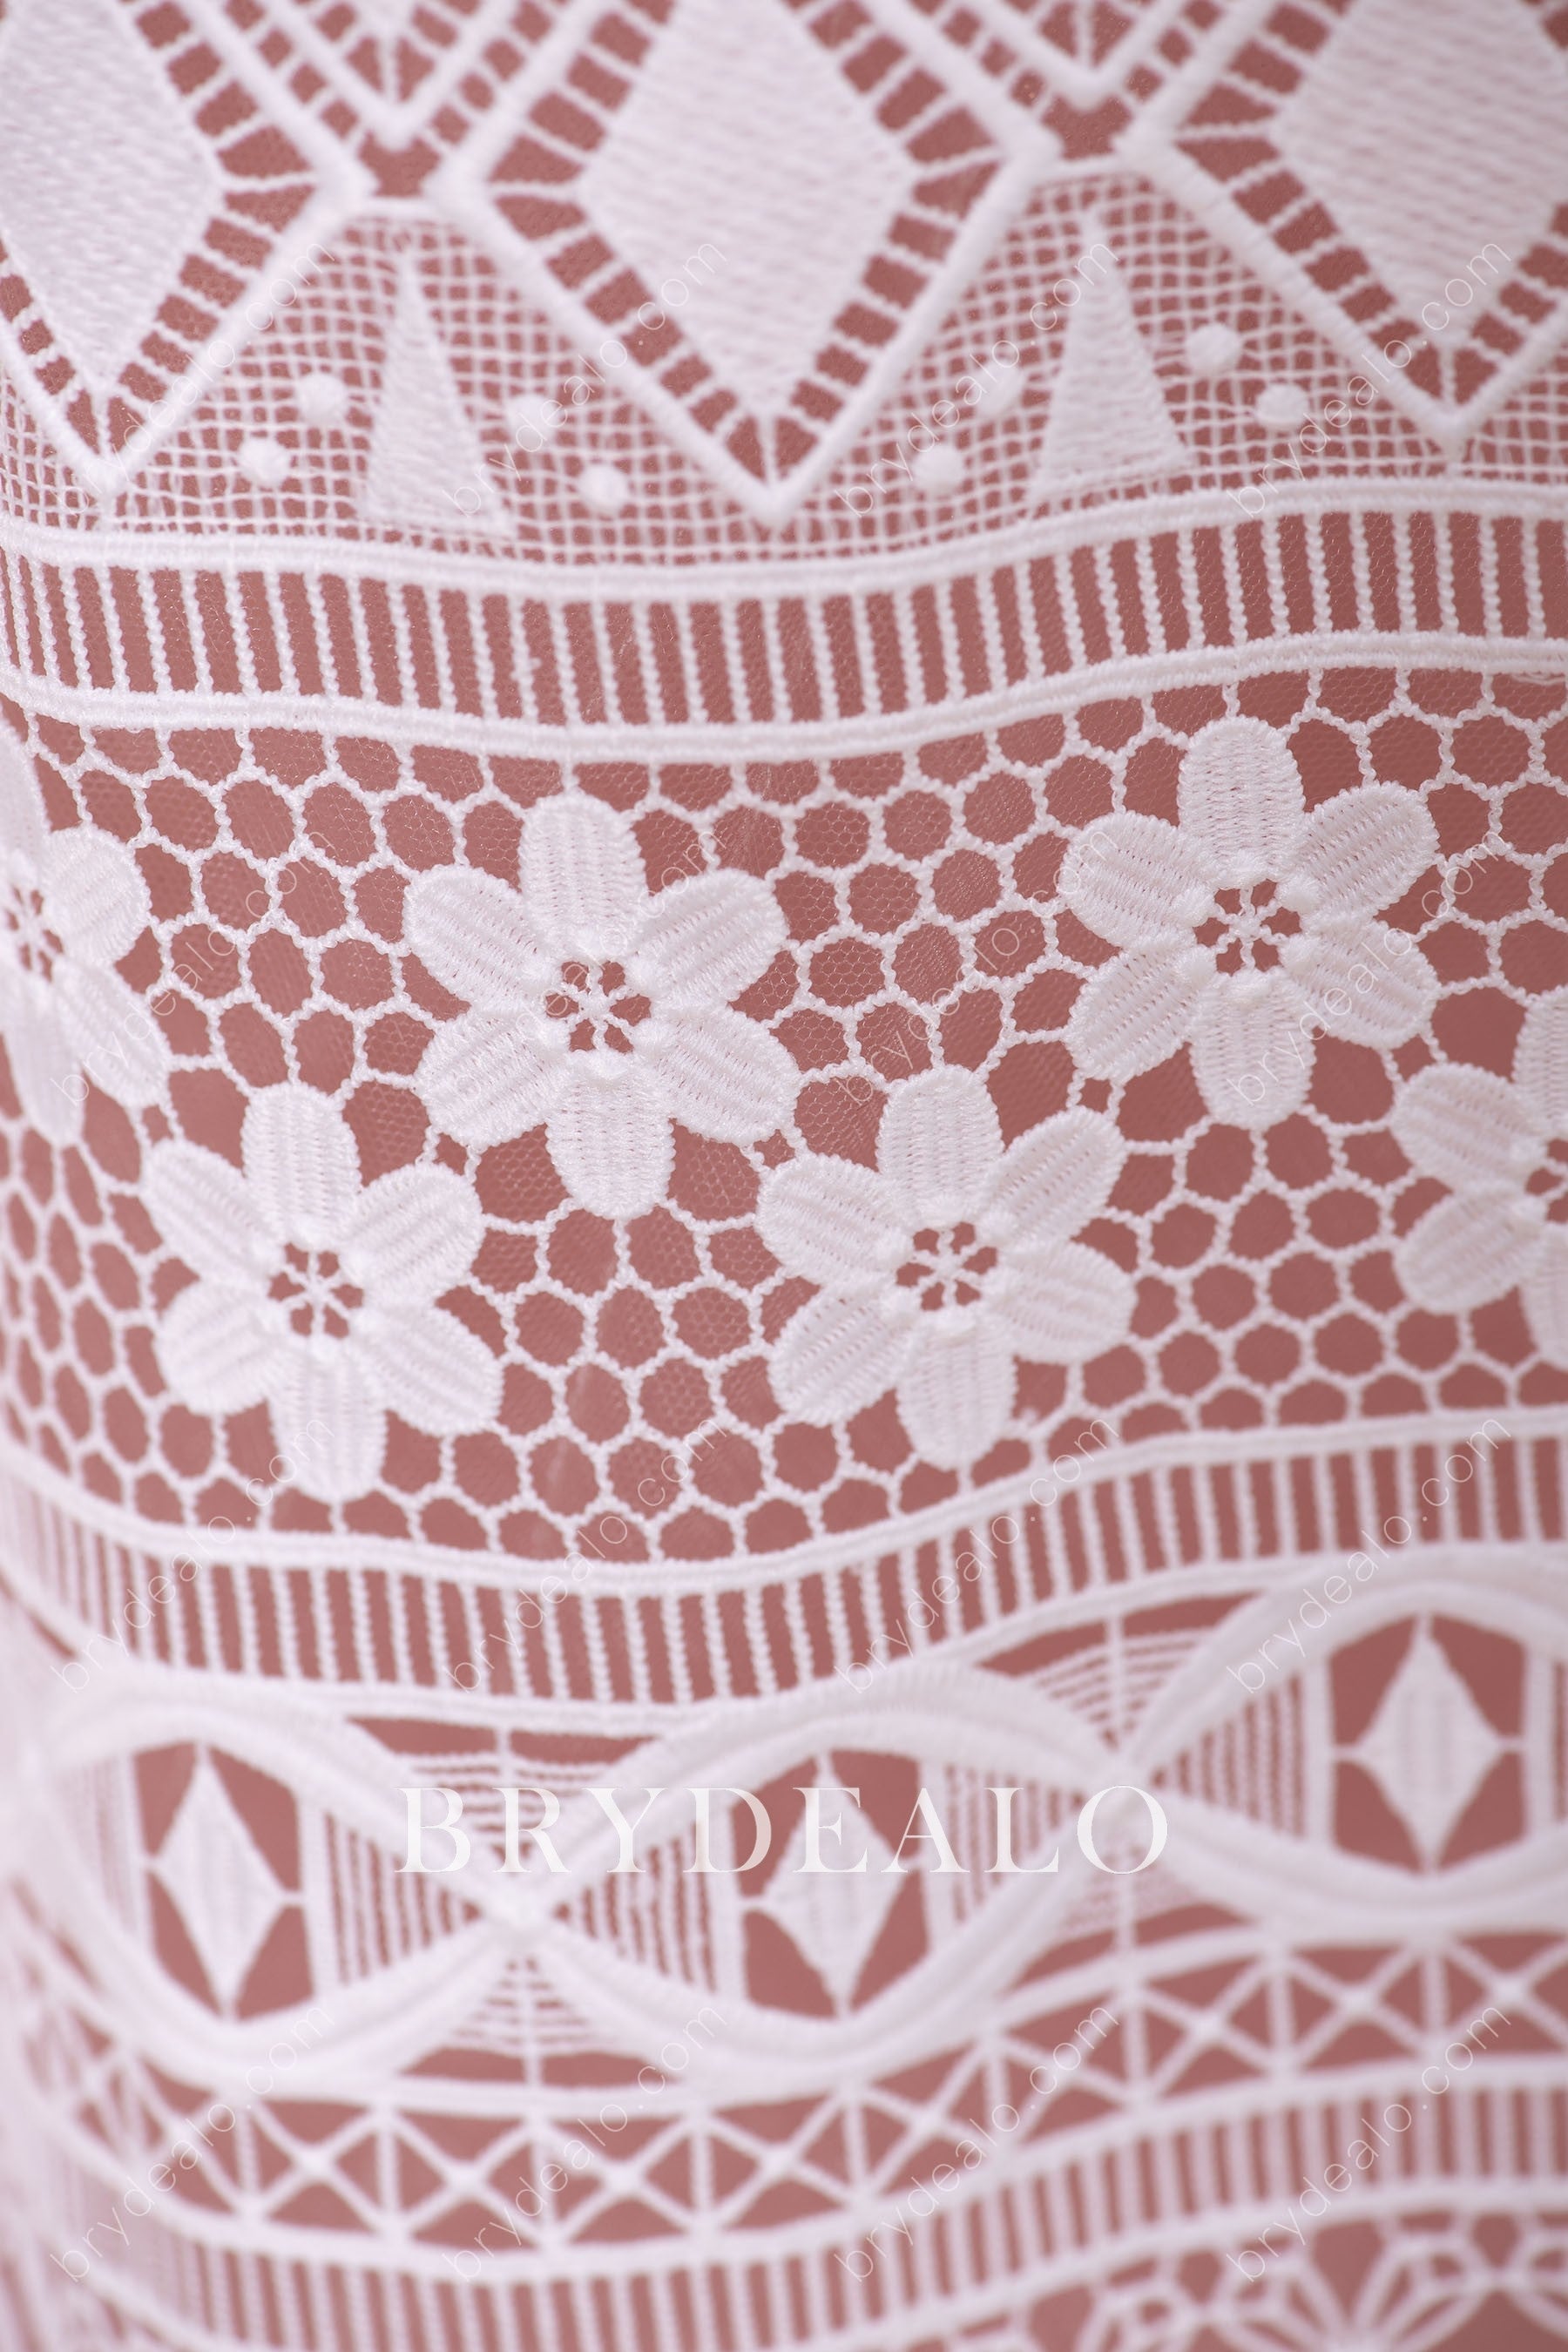 Double Border Full Patterned Crochet Lace Fabric